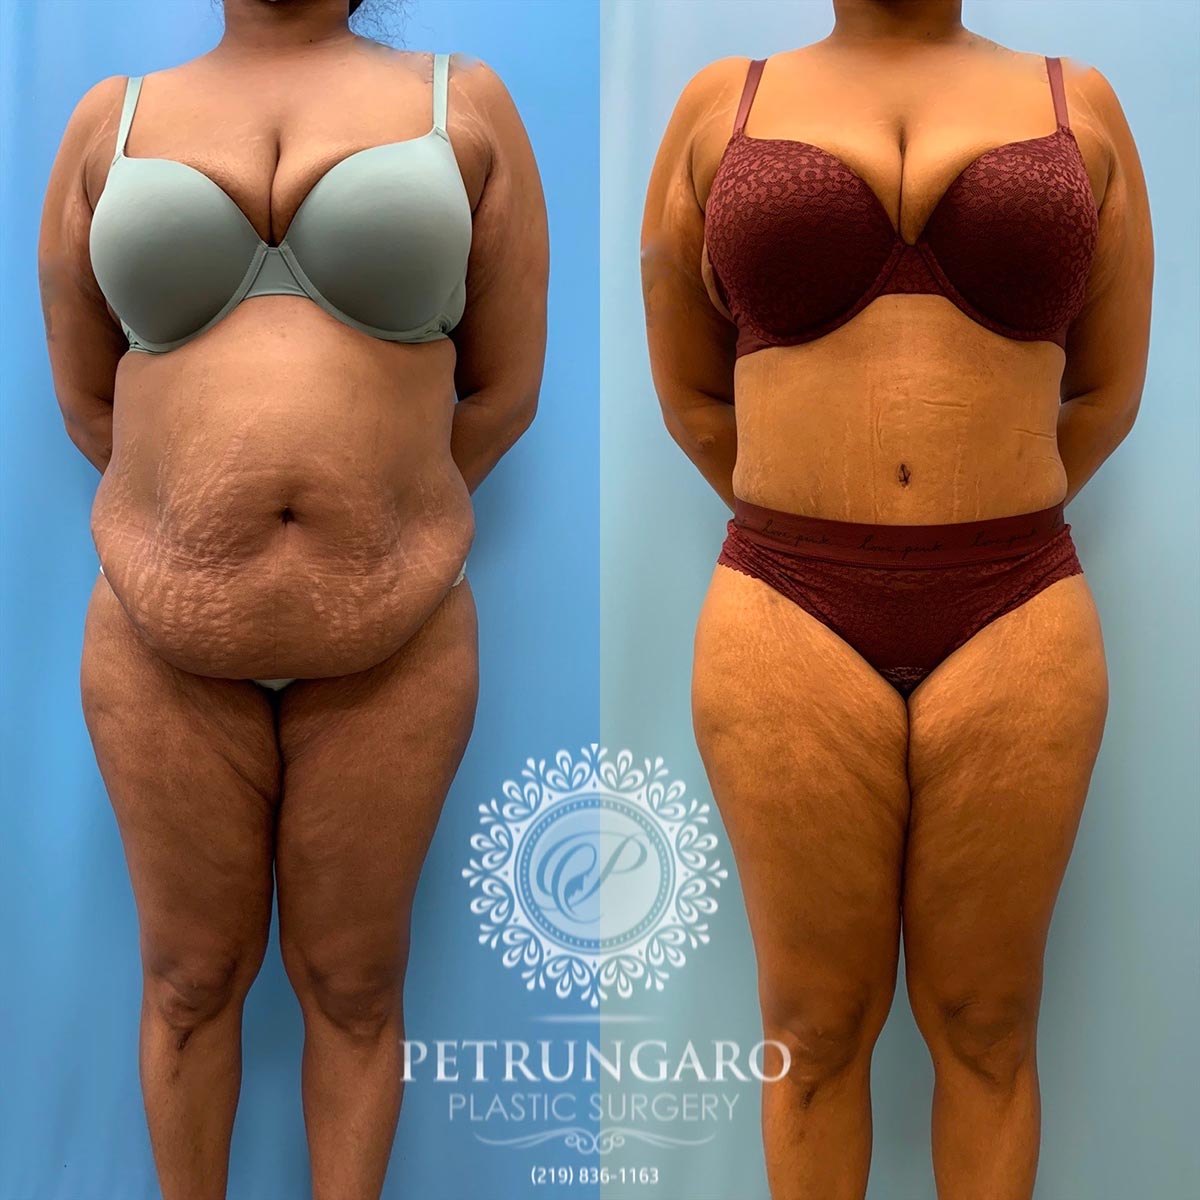 37 year old woman 3 months after tummy tuck with Lipo 360-1